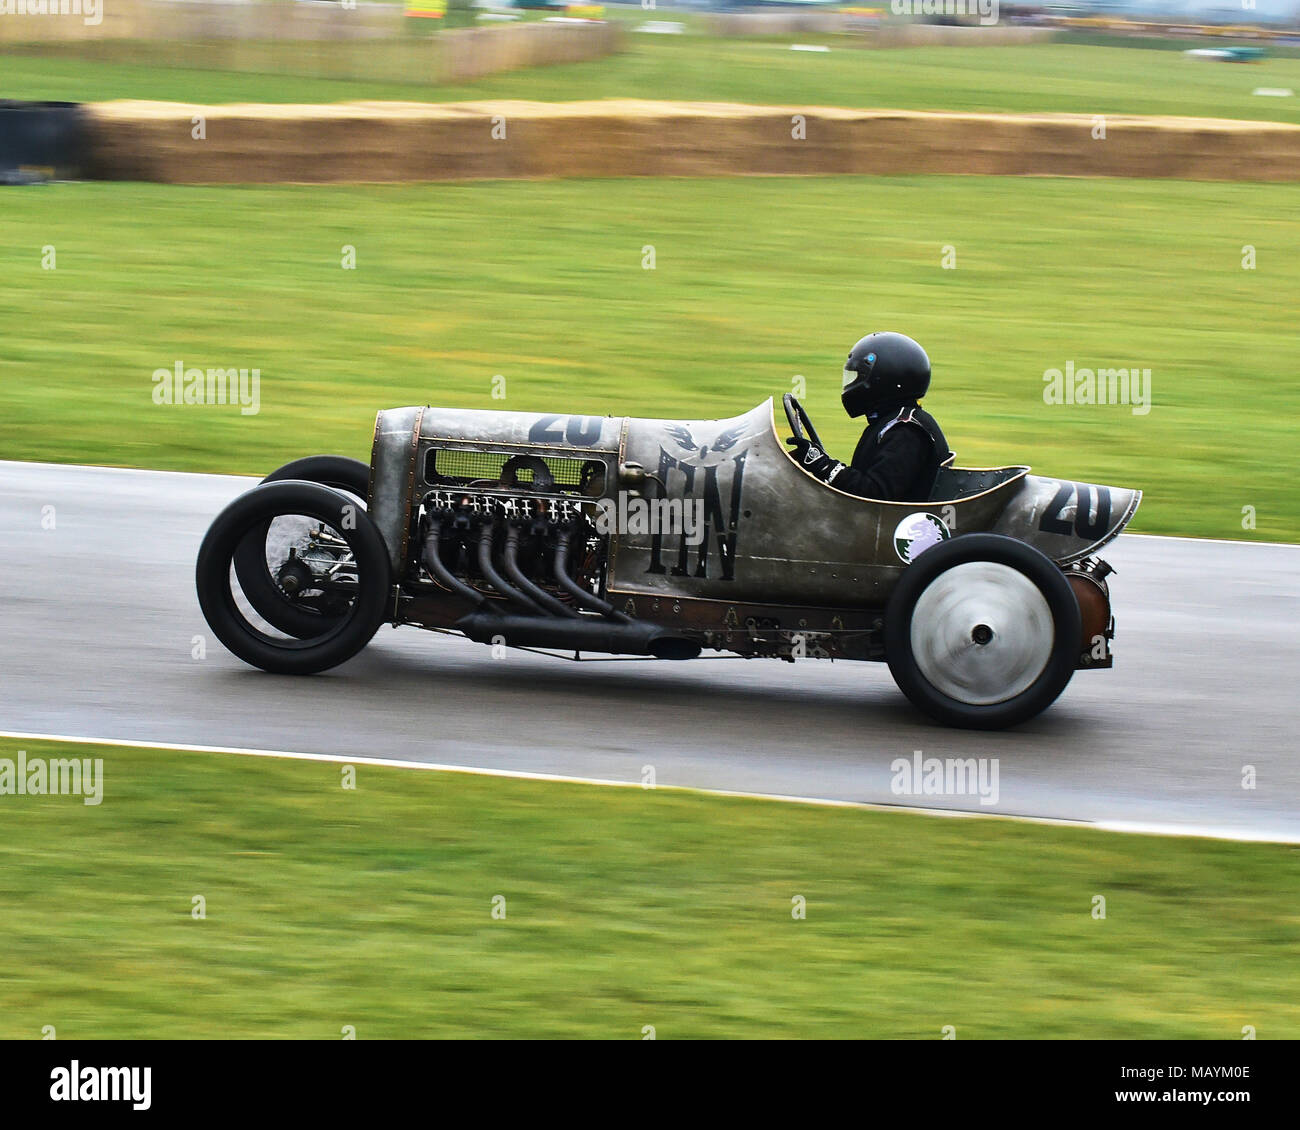 Richard Scaldwell, GN JAP GP Special, Bolster Cup, 76th Members Meeting, England, Goodwood, March 2018, Sussex, Autosport, cars, circuit racing, class Stock Photo